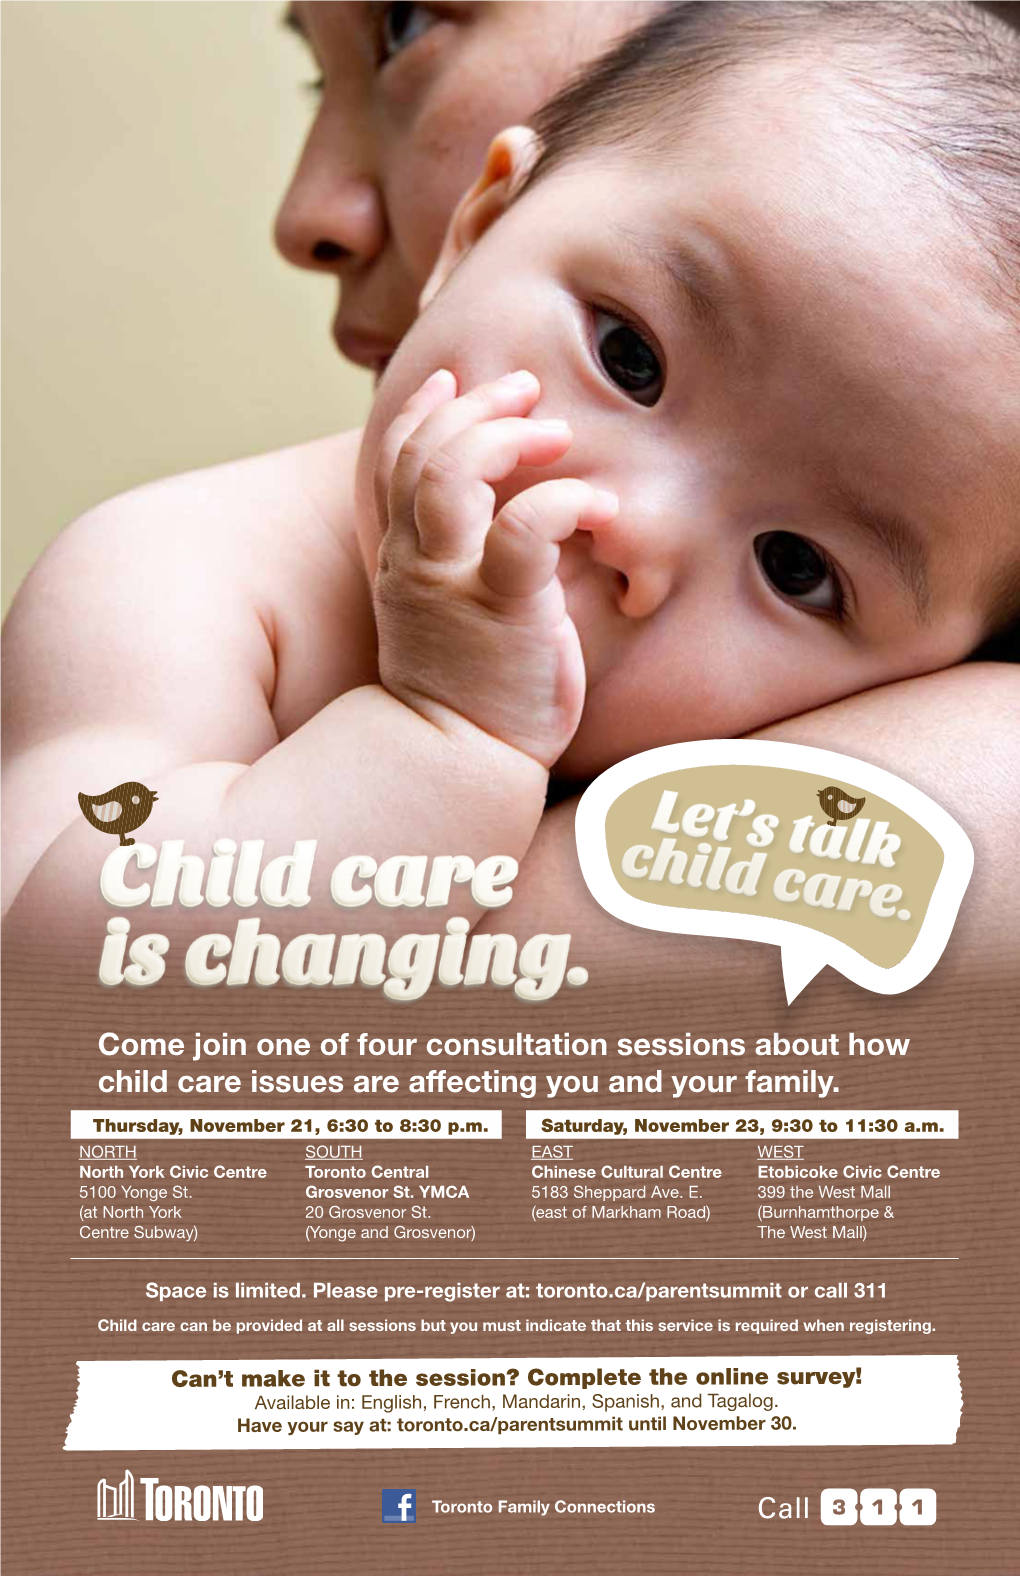 Come Join One of Four Consultation Sessions About How Child Care Issues Are Affecting You and Your Family